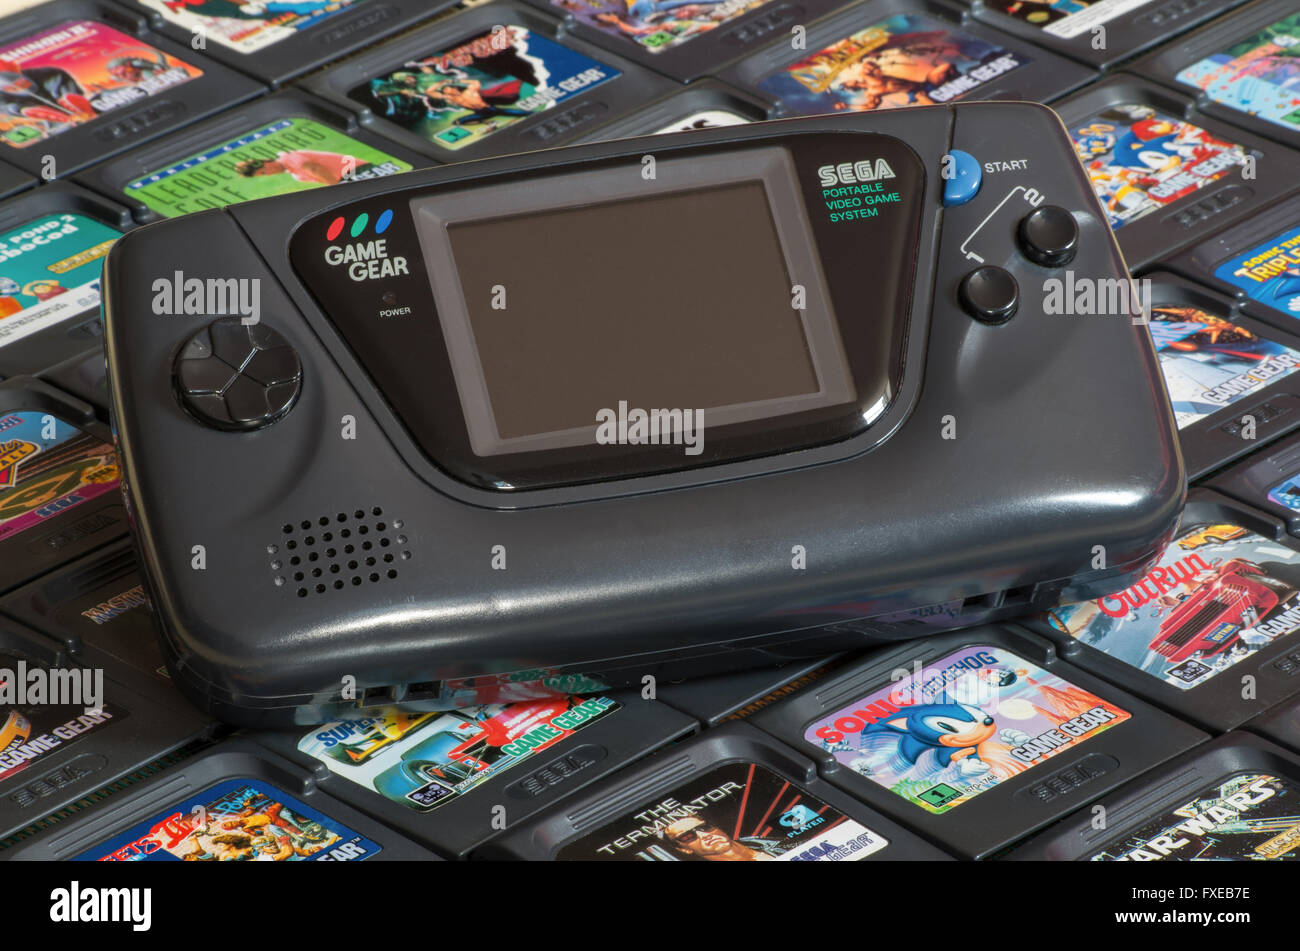 The Sega Game Gear portable video game system on a bed of video game cartridges including Sonic the Hedgehog and Star Wars Stock Photo